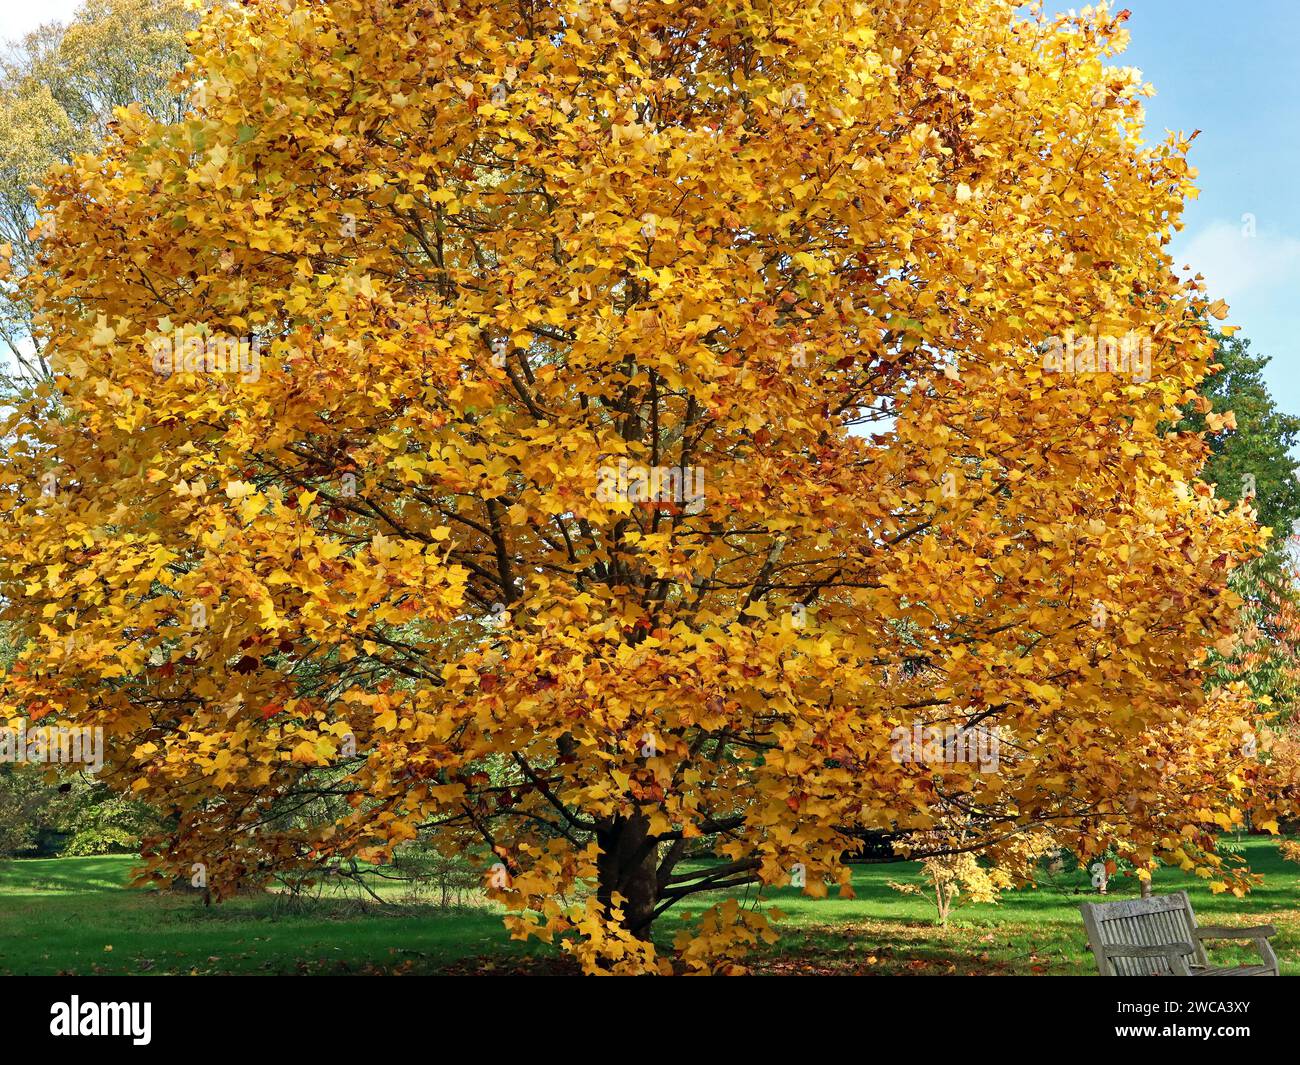 A park bench sits in the shade of a stunning bright golden Tulip tree (Liriodendron tulipifera) in autumn. Sunny November day, England Stock Photo